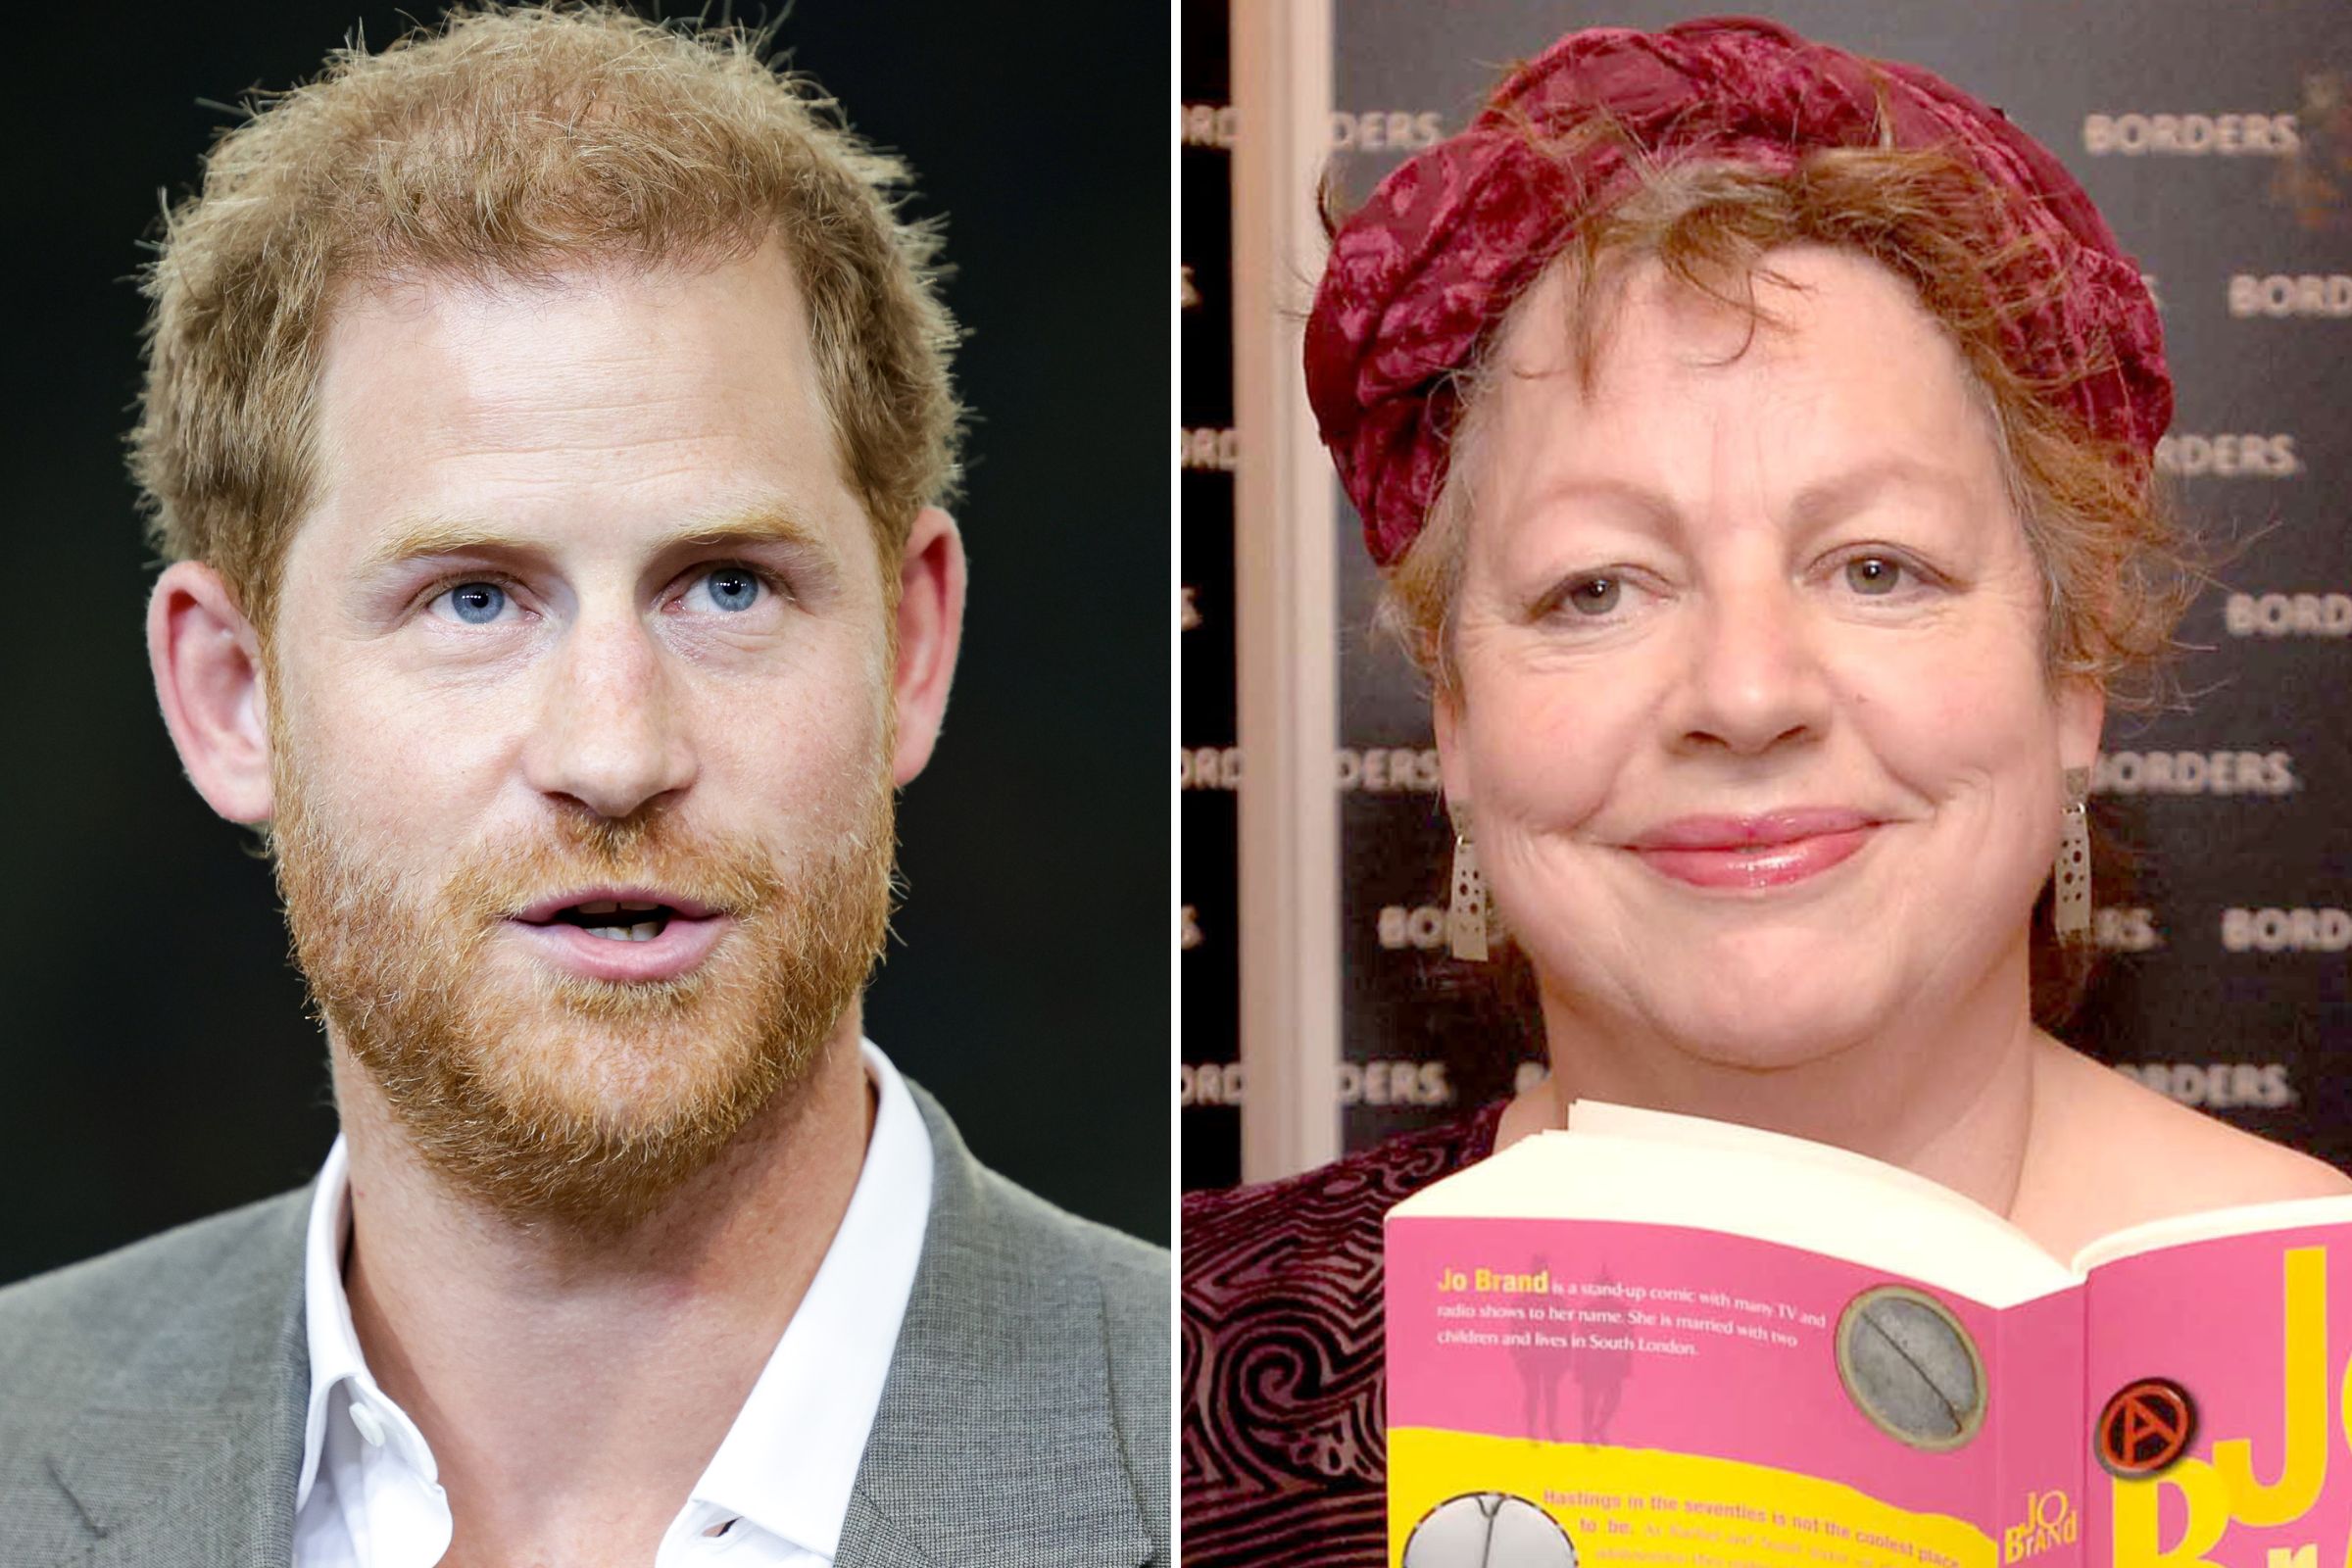 Prince Harry Was 'Apoplectic With Rage' Over Cocaine Joke—Book